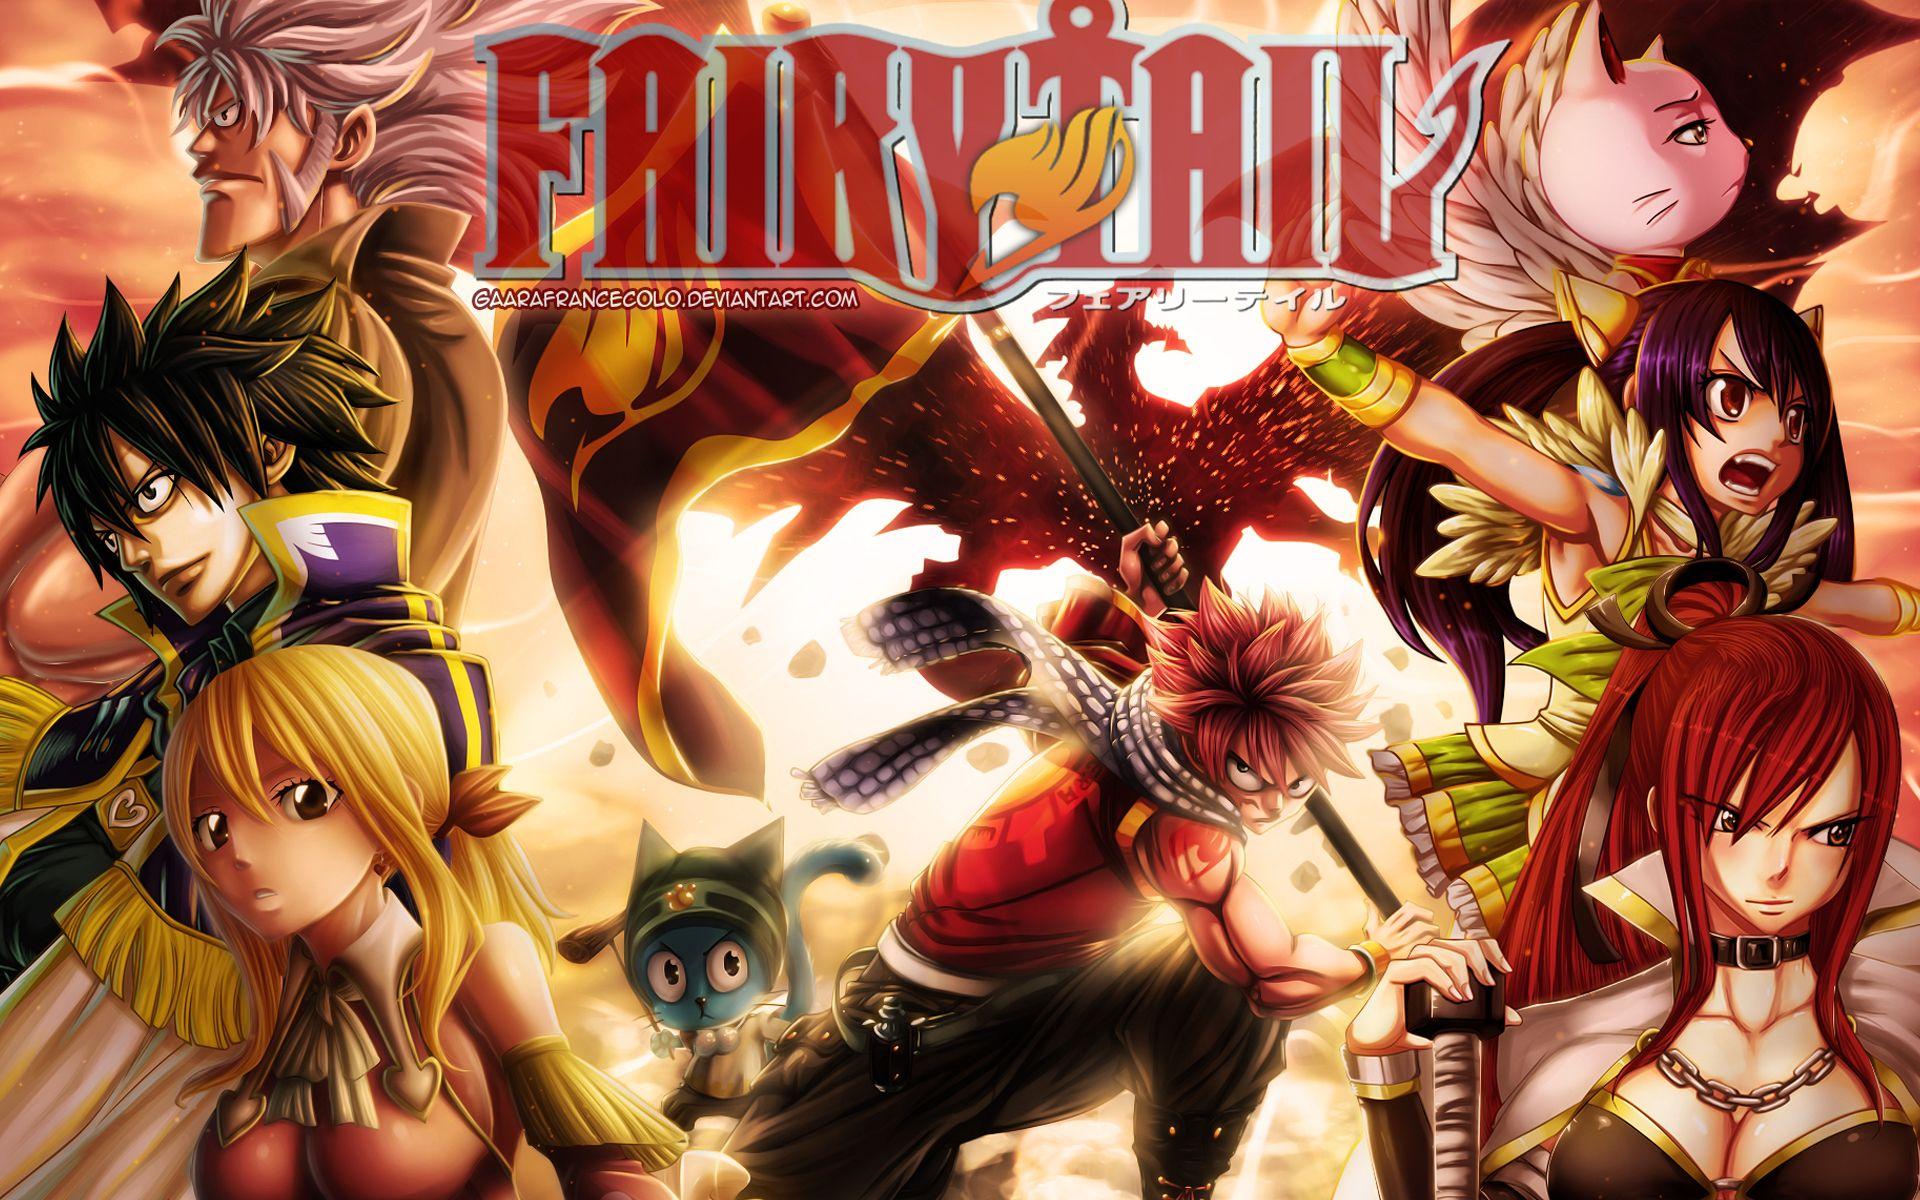 Download Fairy Tail Wallpaper 598. Best Collections of Top